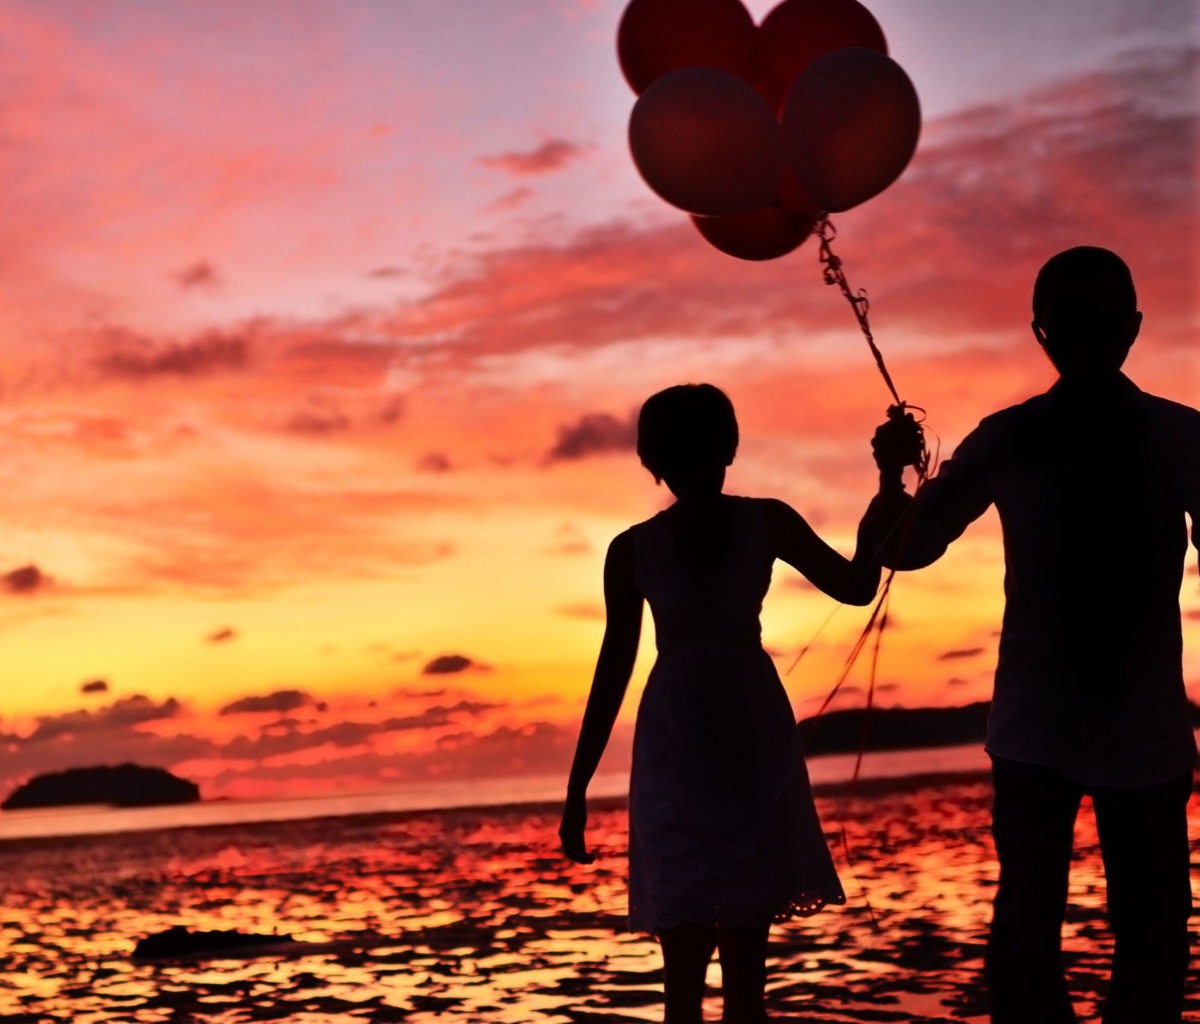 Couple With Balloons Silhouette At Sunset wallpaper 1200x1024